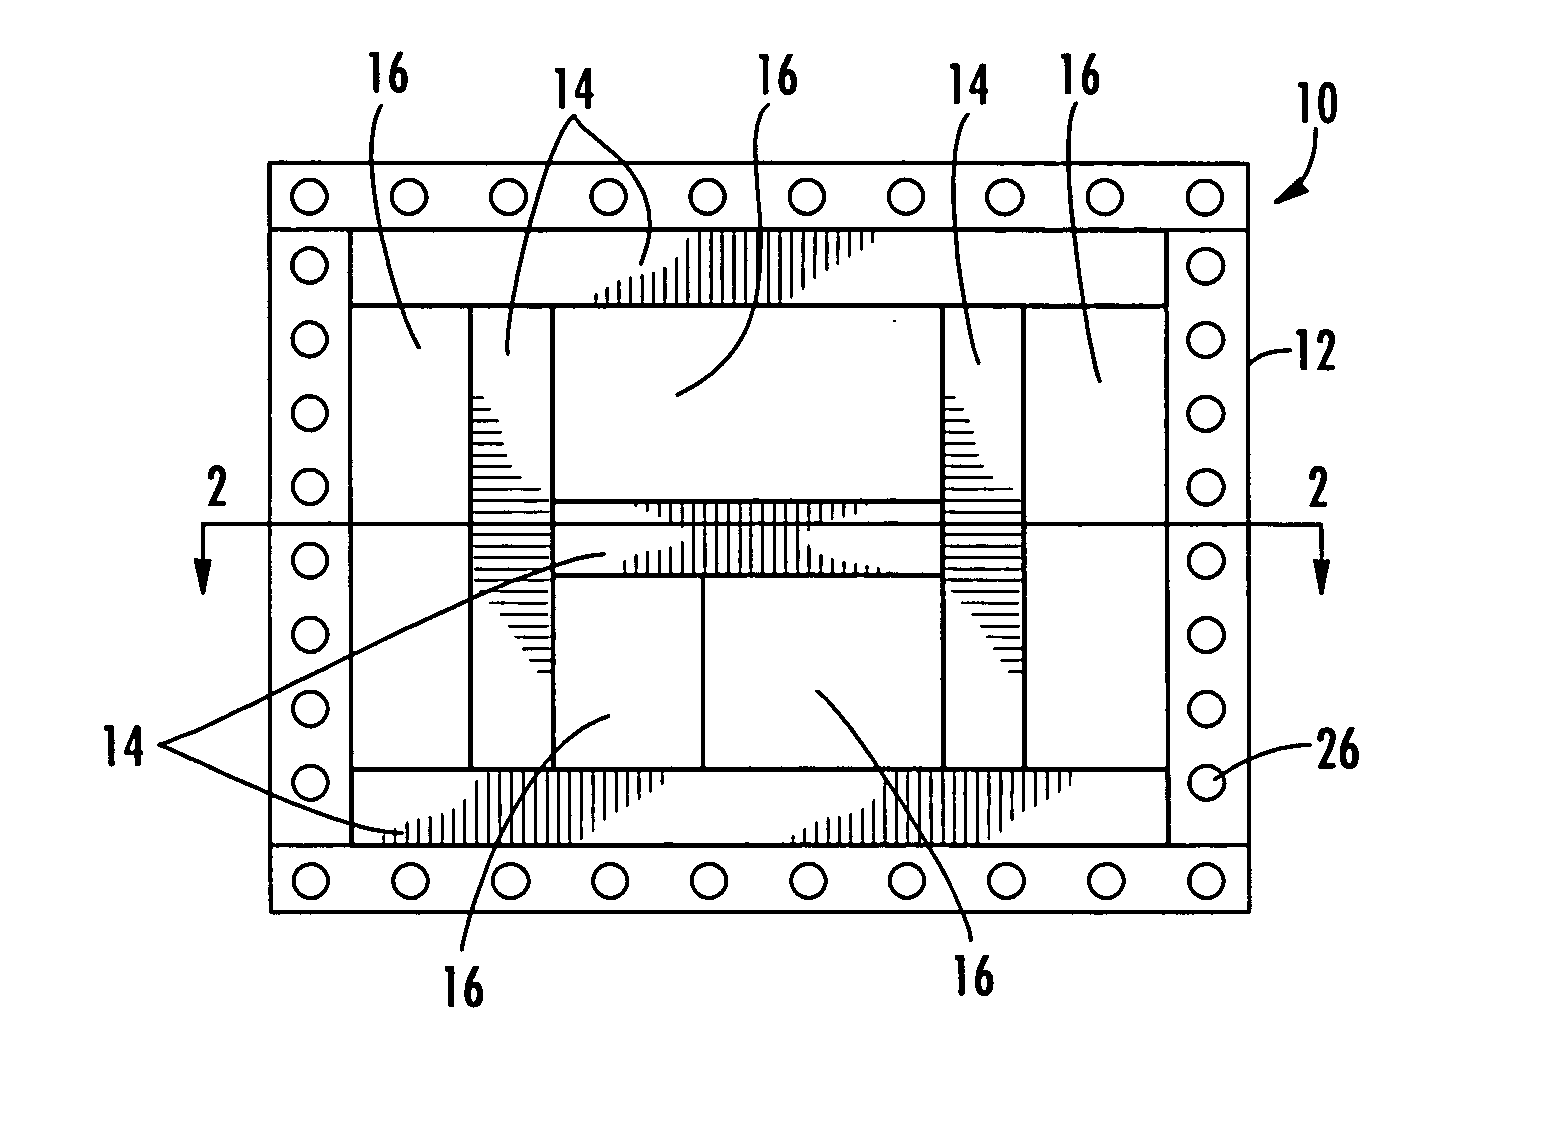 Apparatus and system for welding preforms and associated method